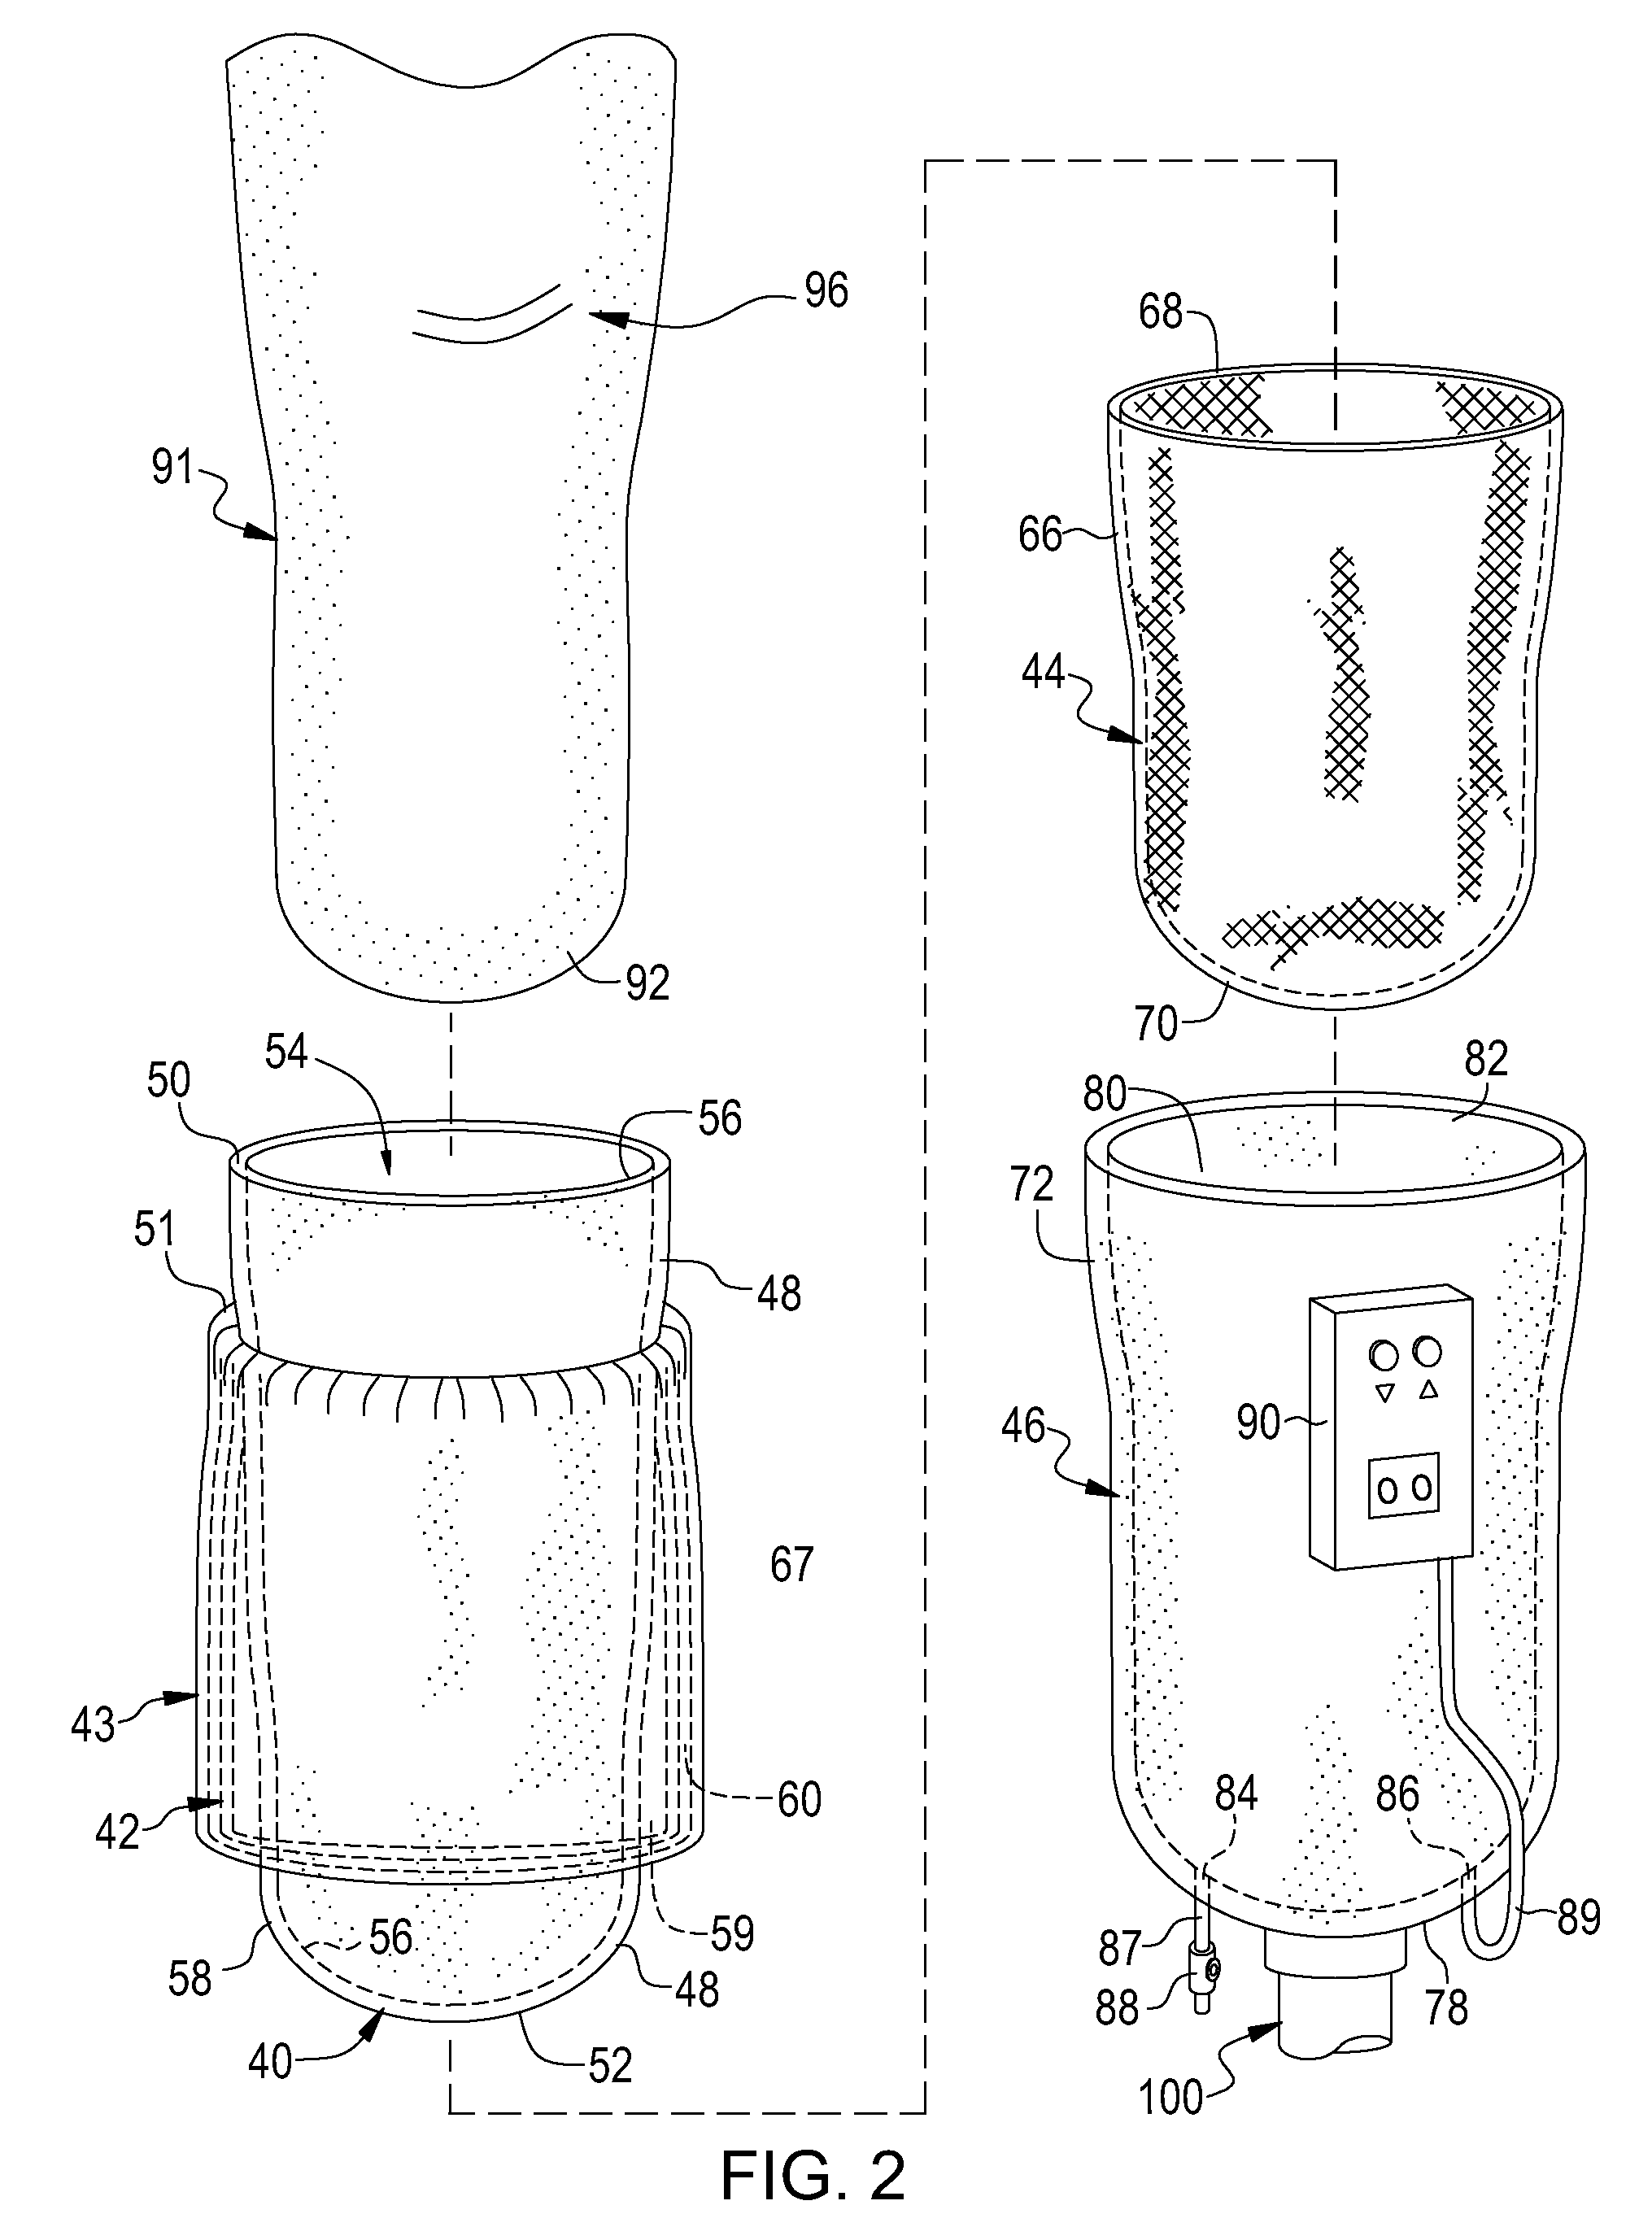 Vacuum assisted prosthetic sleeve and socket utilizing a double membrane liner